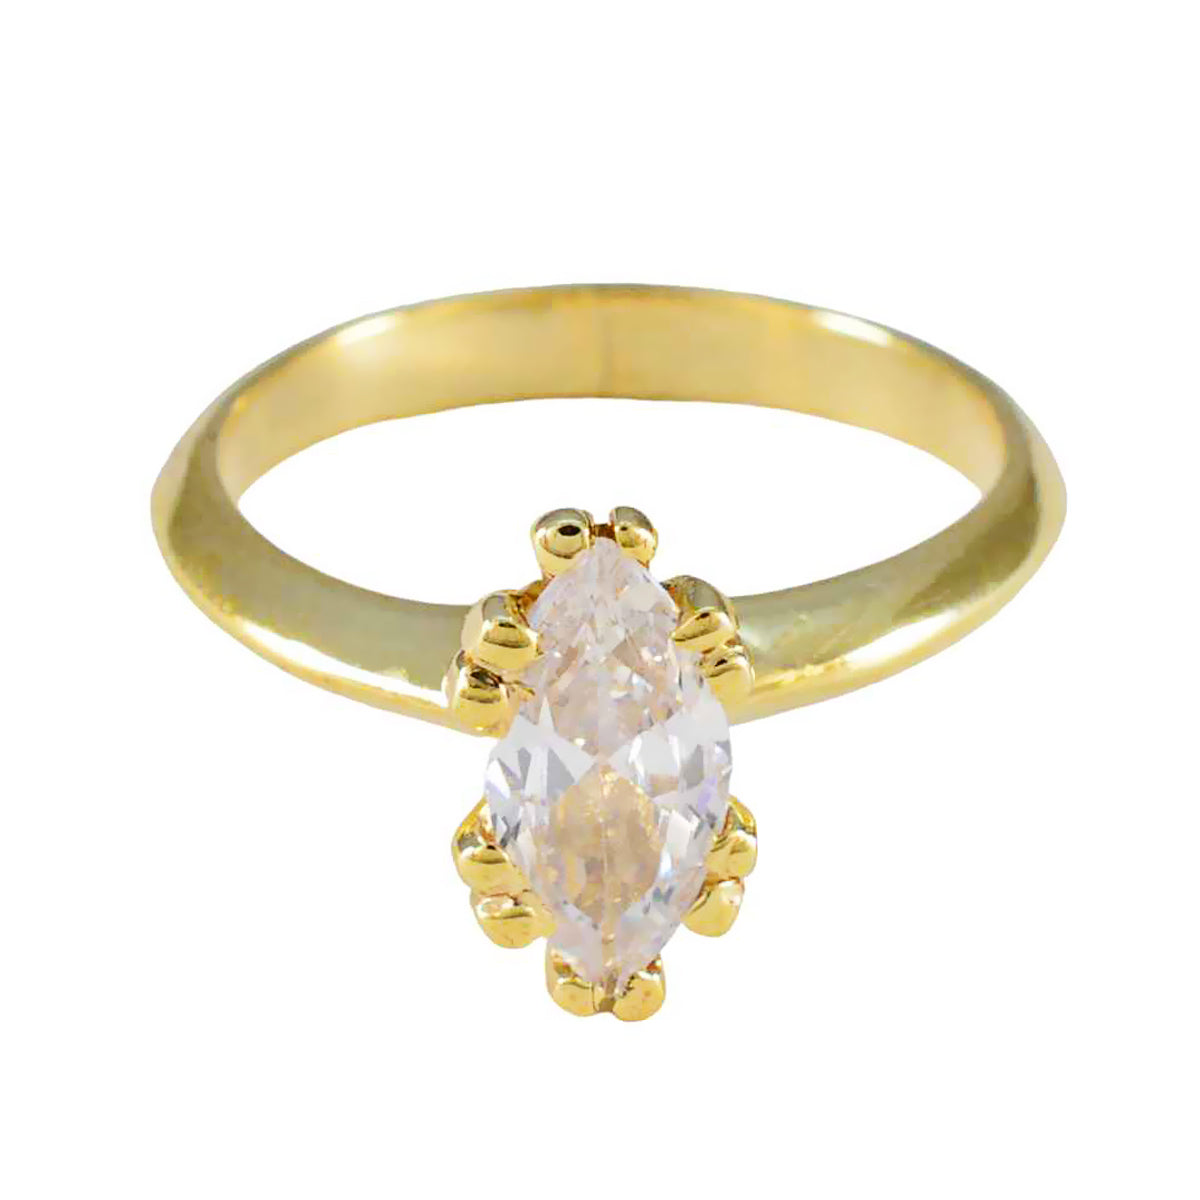 Riyo Excellent Silver Ring With Yellow Gold Plating White CZ Stone Marquise Shape Prong Setting Ring